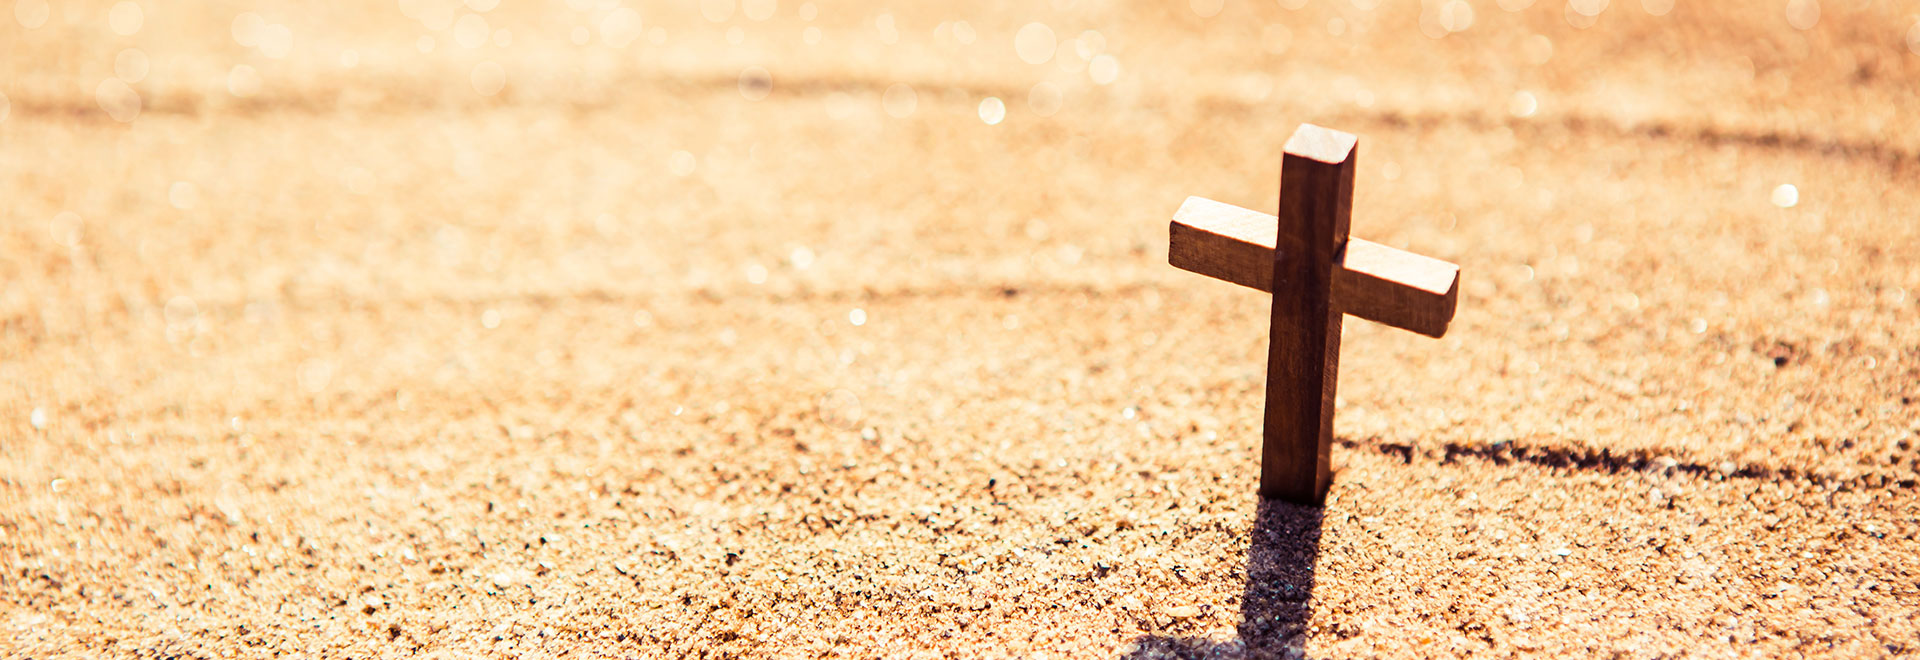 a small wooden cross stuck in the sand on a sunny beach